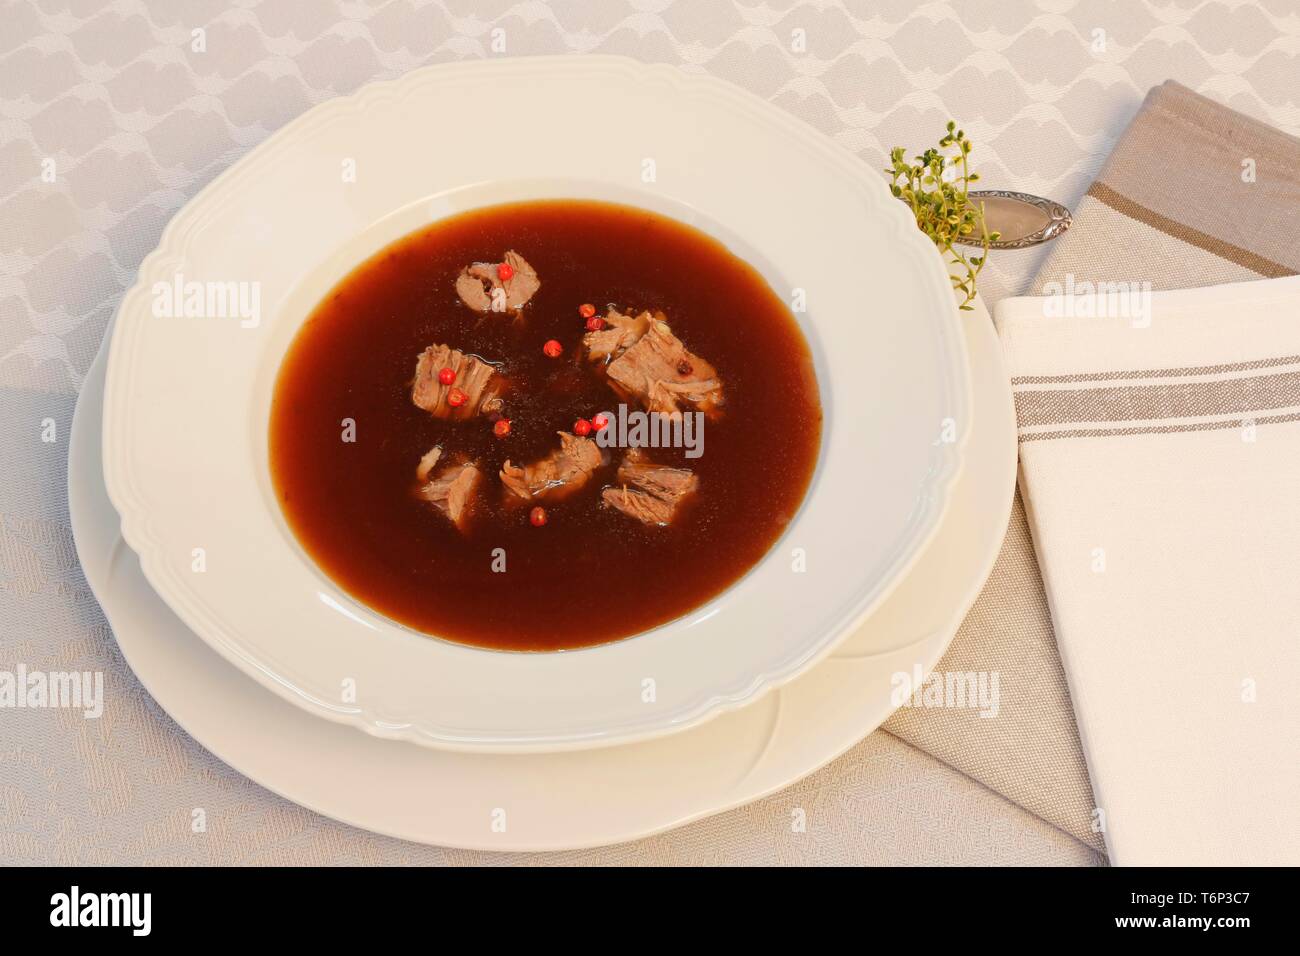 Oxtail soup with red pepper in soup plate, Germany Stock Photo